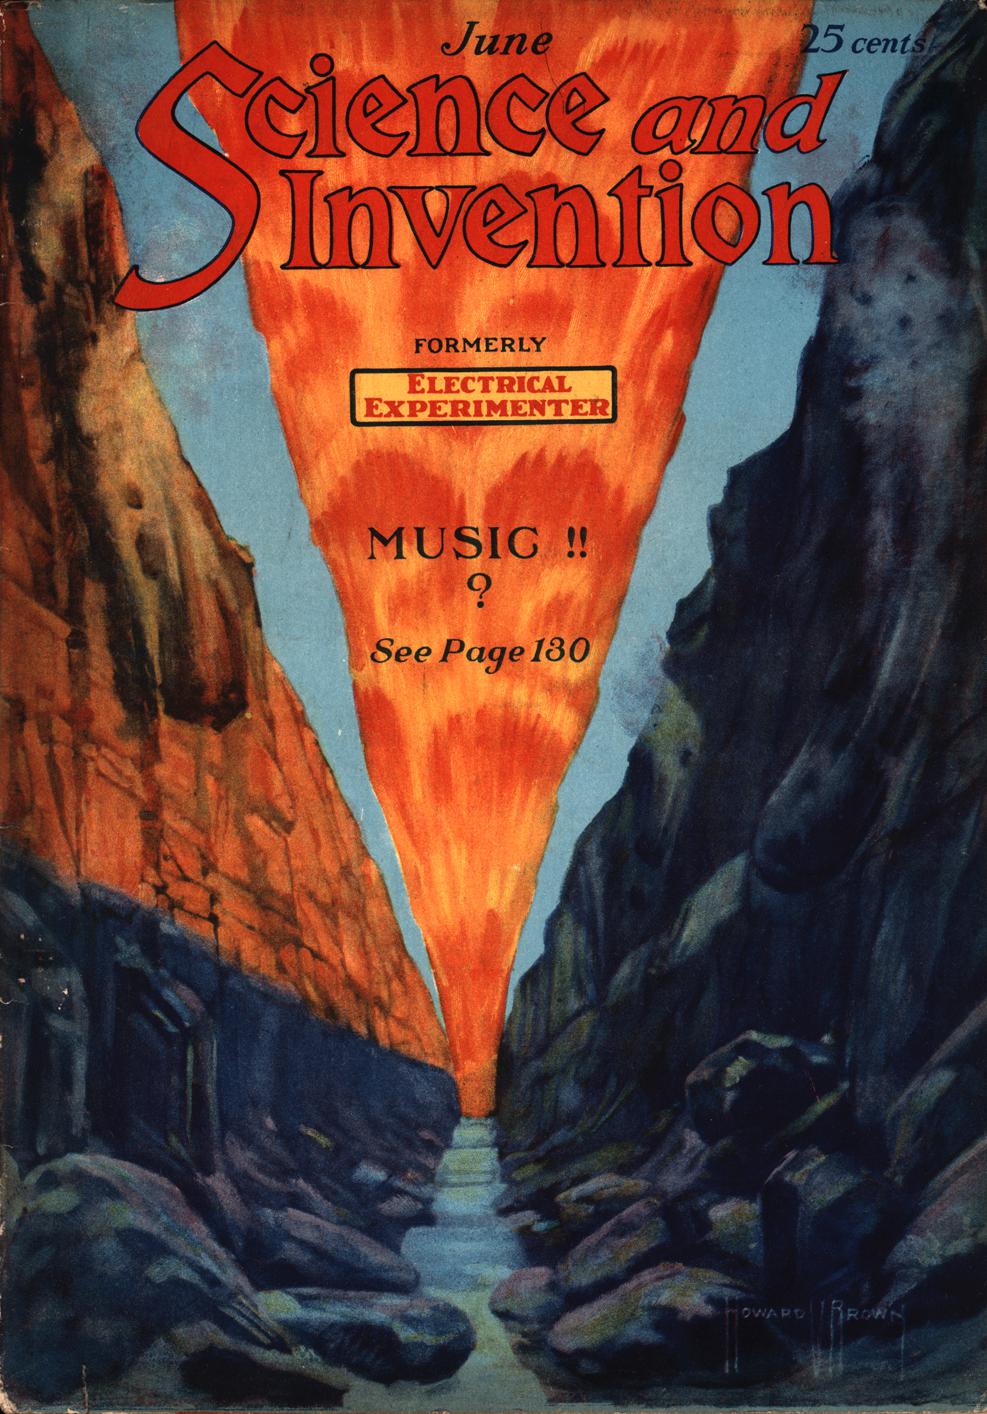 1921 - Science and invention - Vol. 9, No. 2